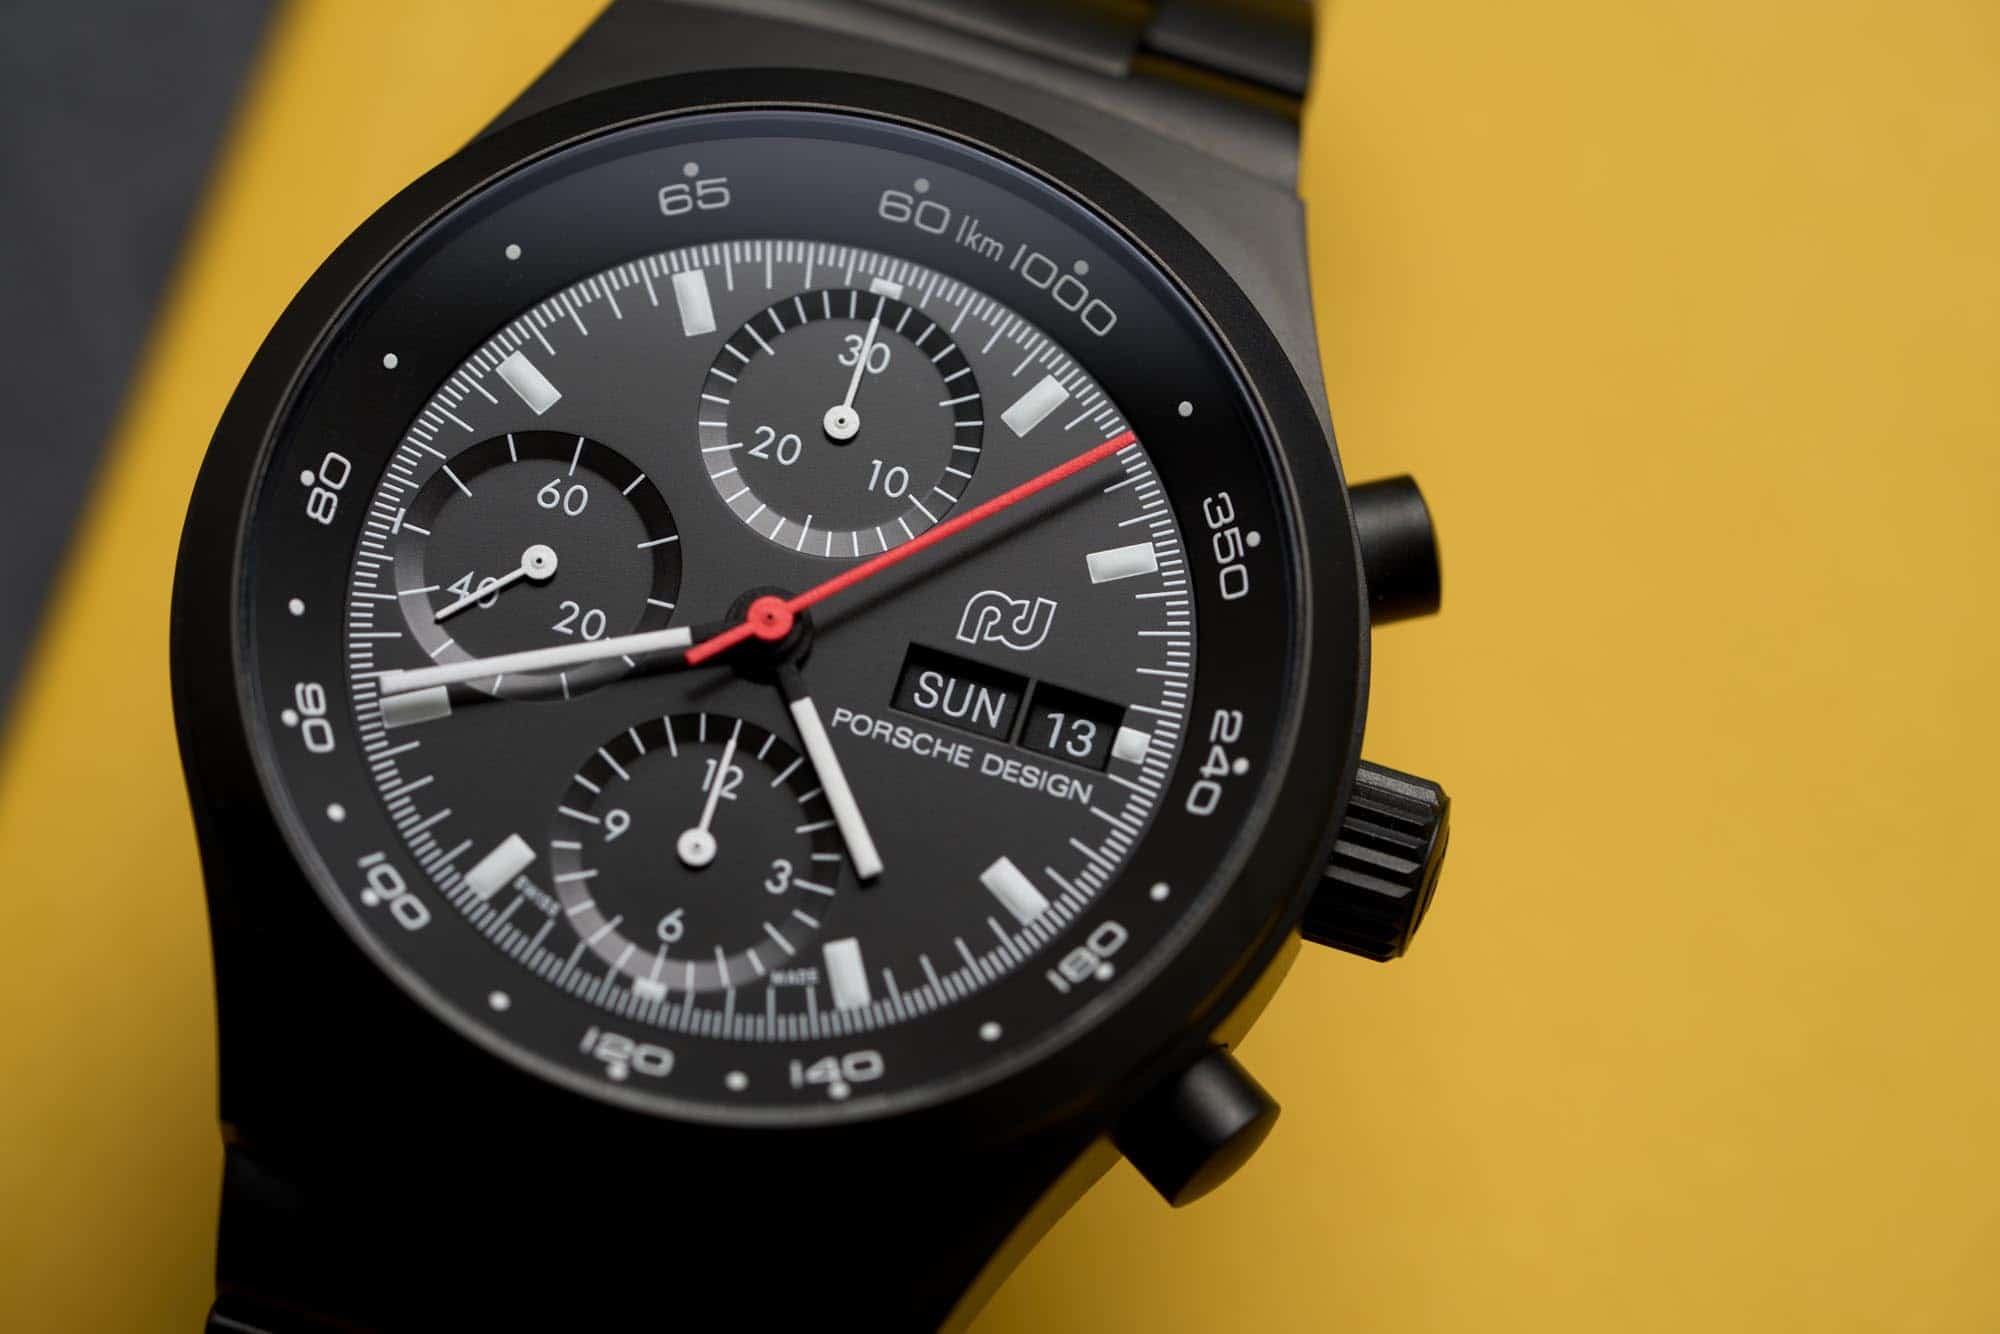 VIDEO] Hands-On With The Porsche Design Chronograph 1 1972 Limited